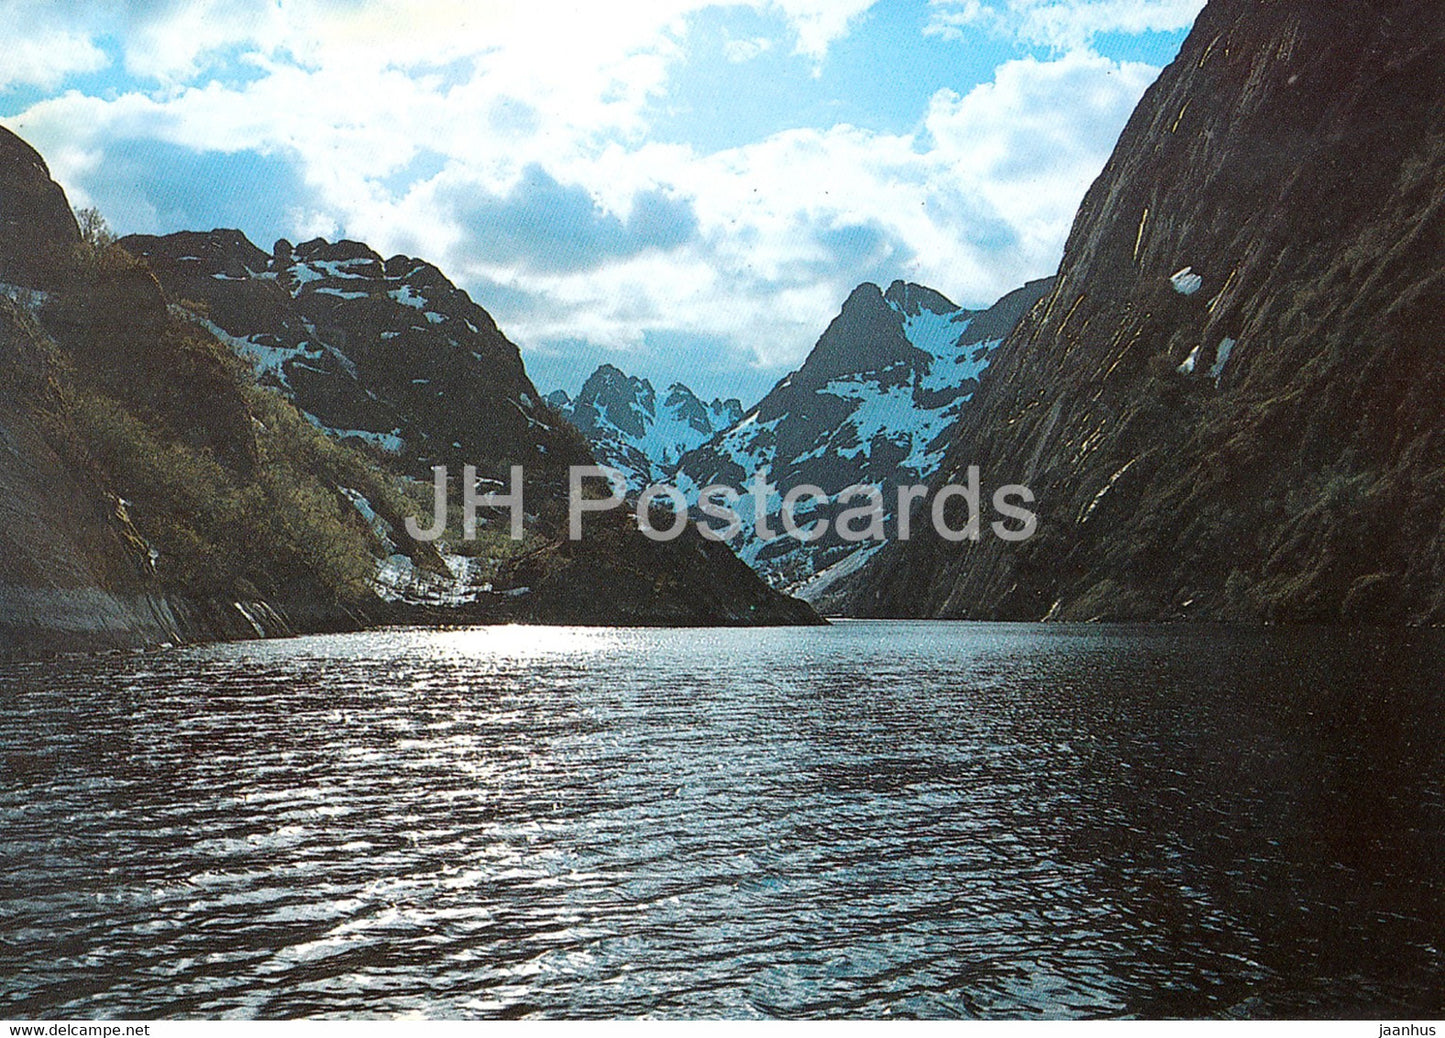 Scenic sightseeing - The Troll Fjord - Norway - unused - JH Postcards